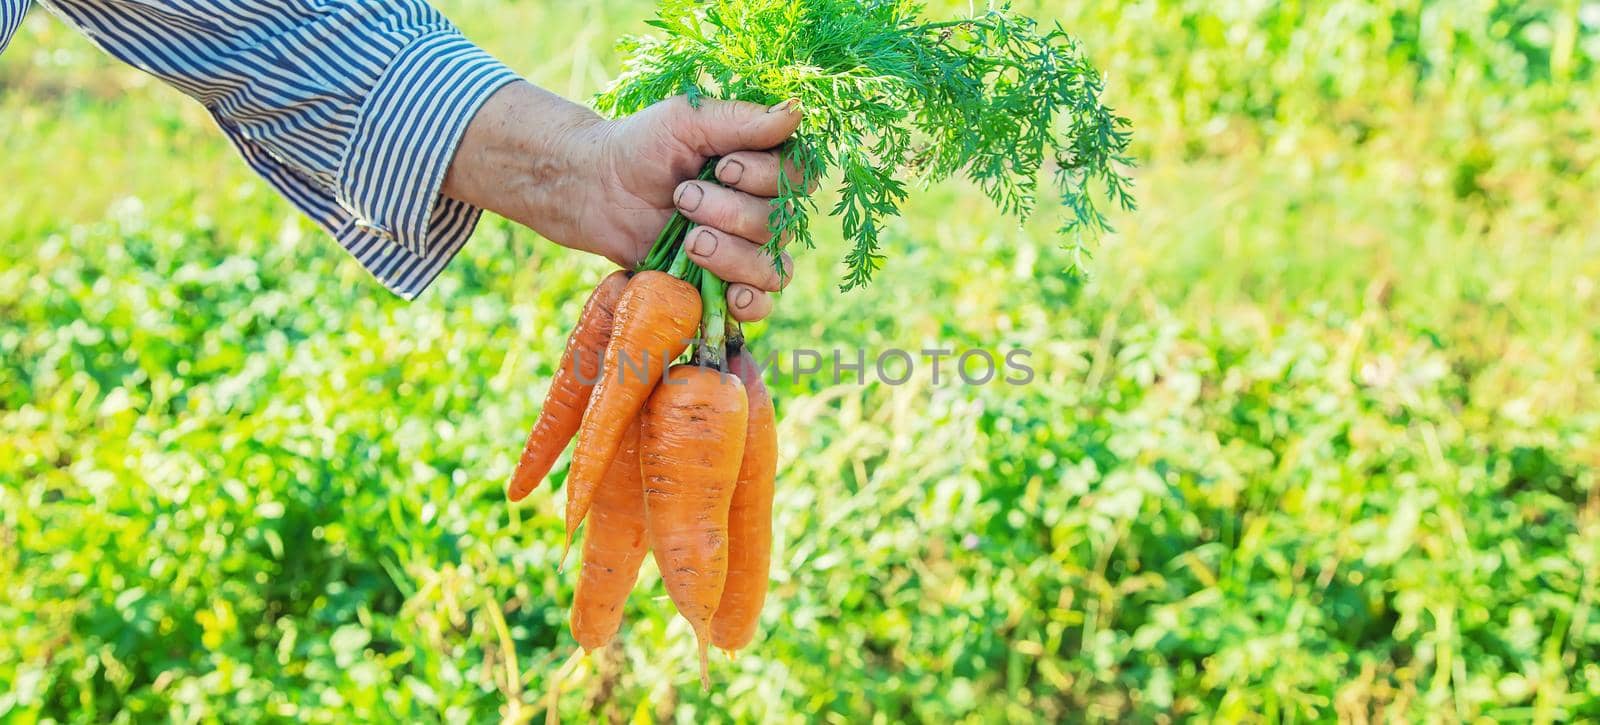 Grandmother with vegetables in her hands in the garden. Organic vegetables. Selective focus. nature.